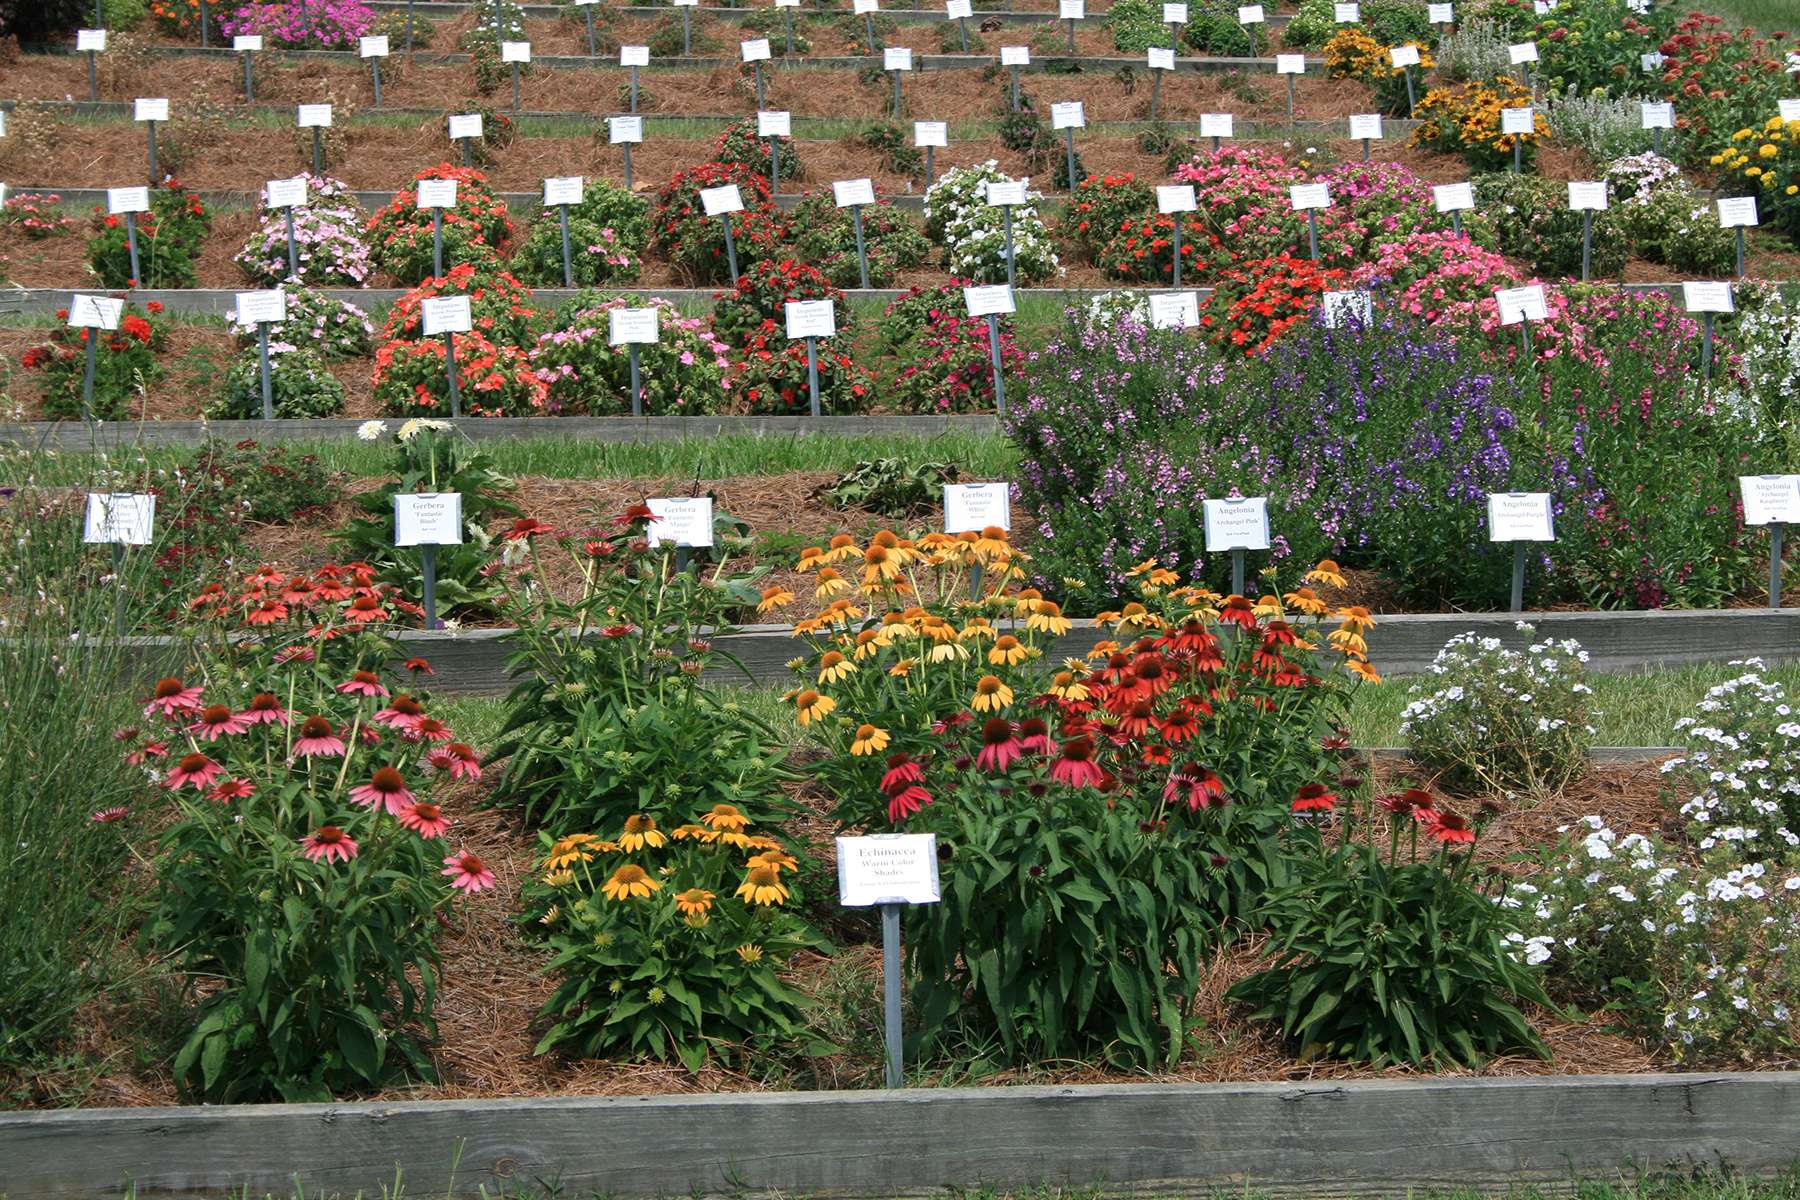 Plant trialing sites use raised beds to provide the best drainage and create a uniform order.